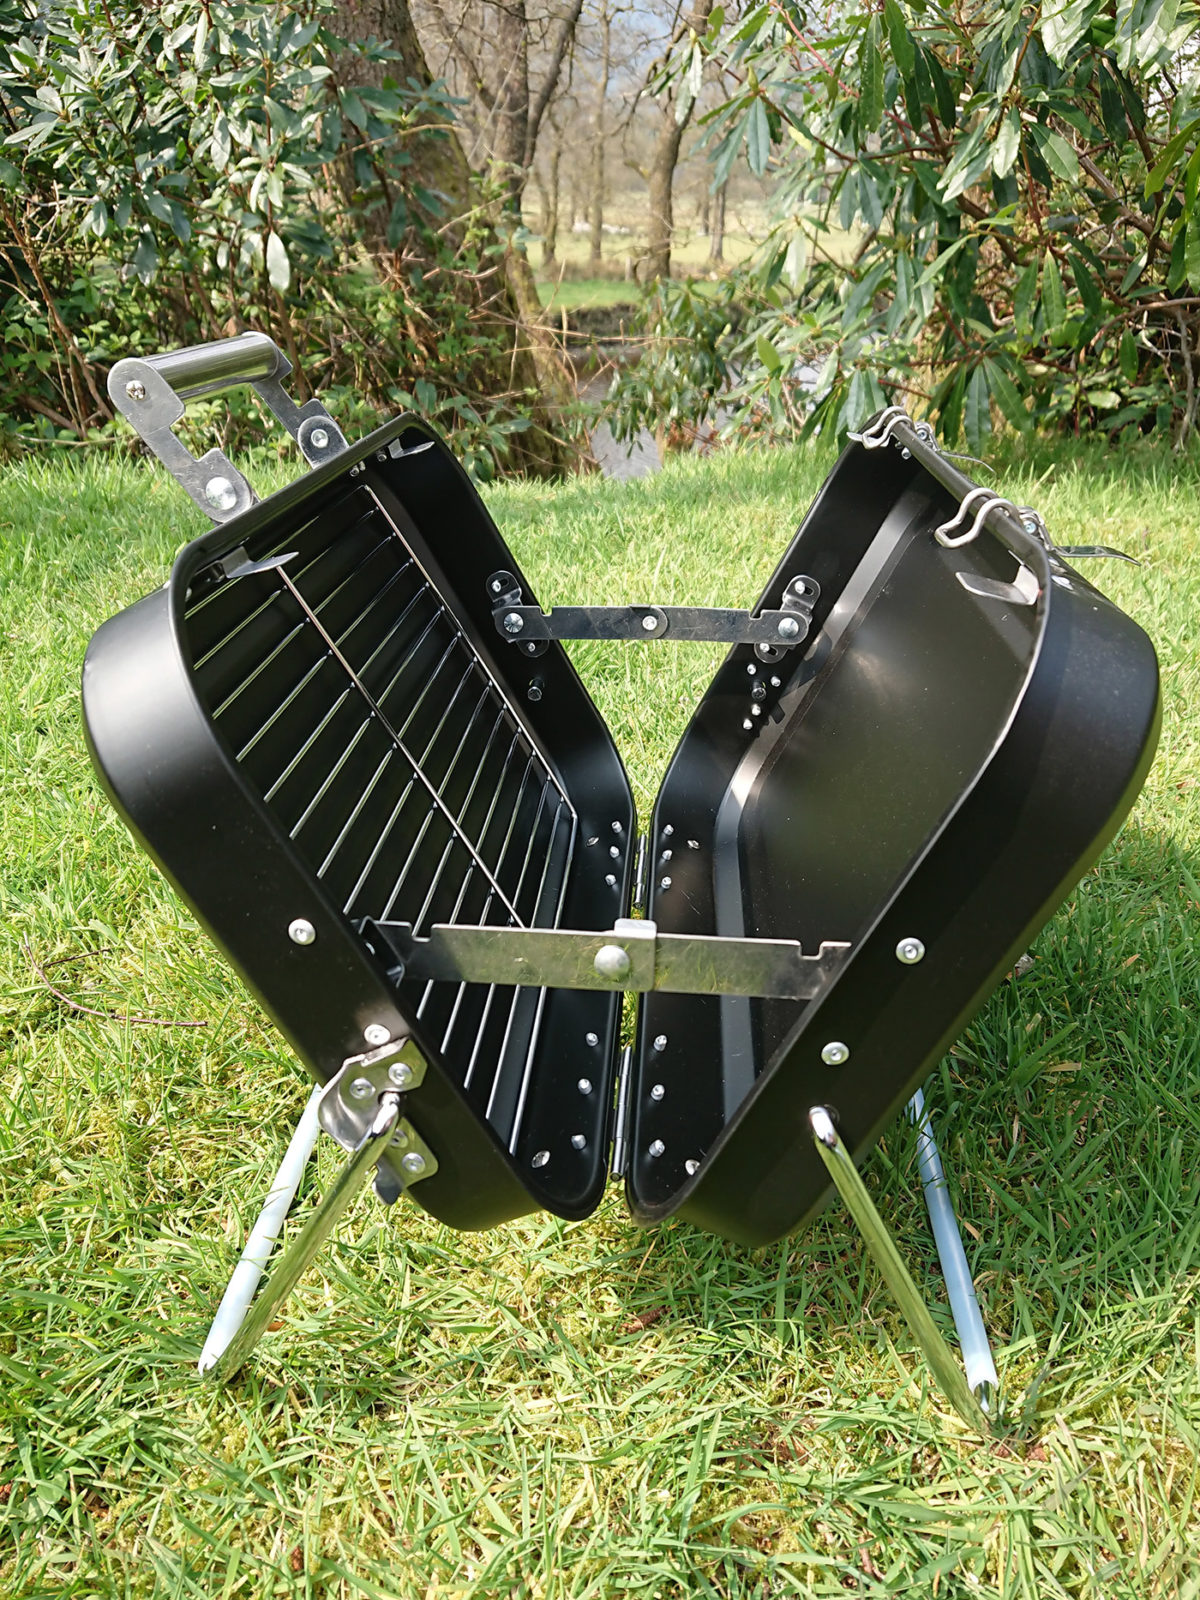 Valiant Nomad Portable Folding Barbecue Review